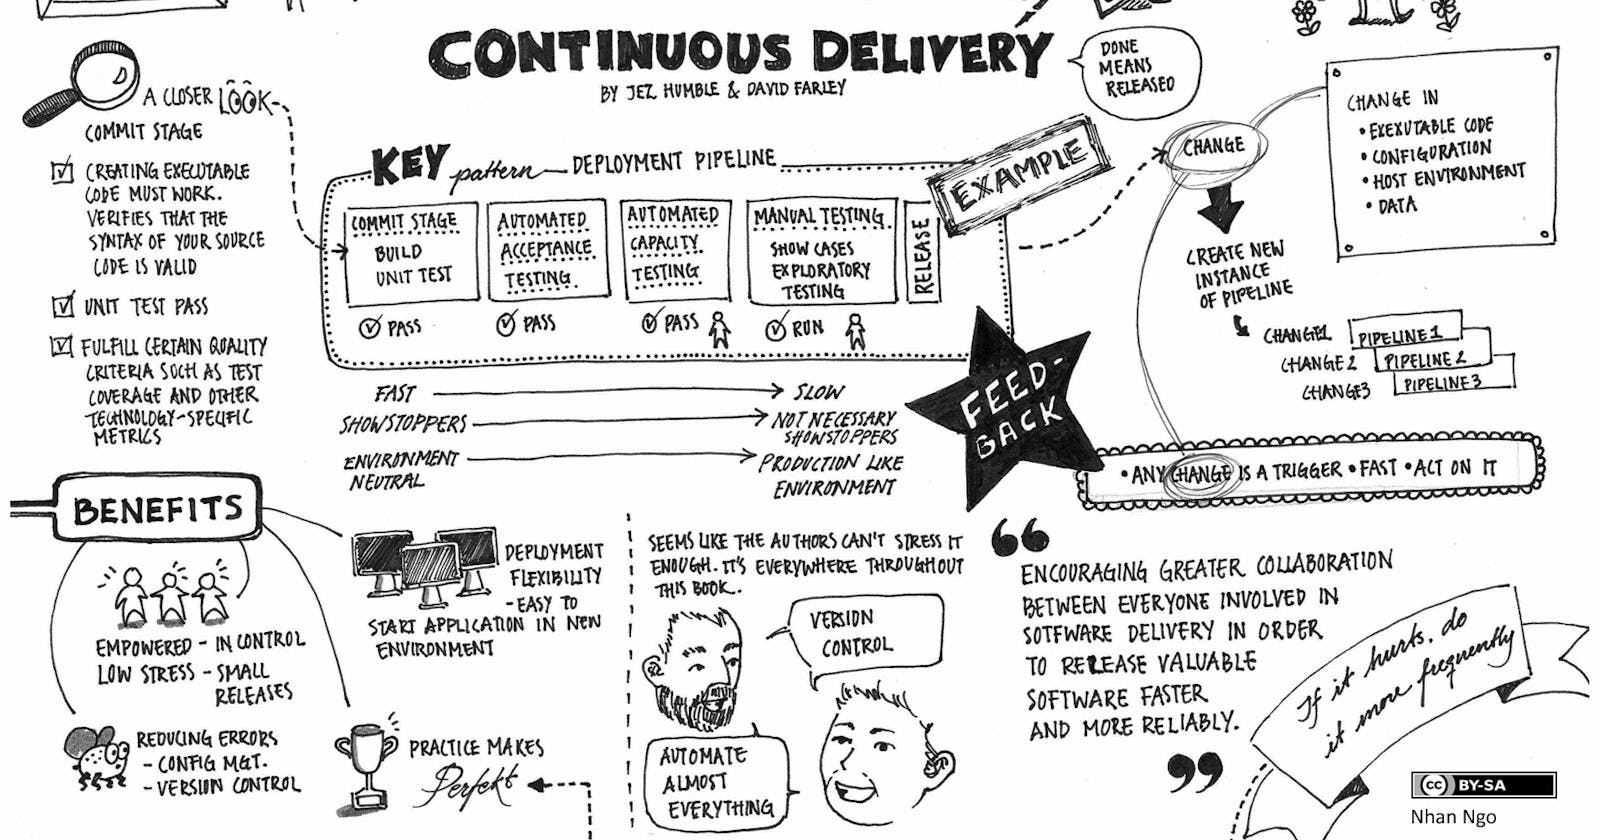 The Power of Continuous Delivery